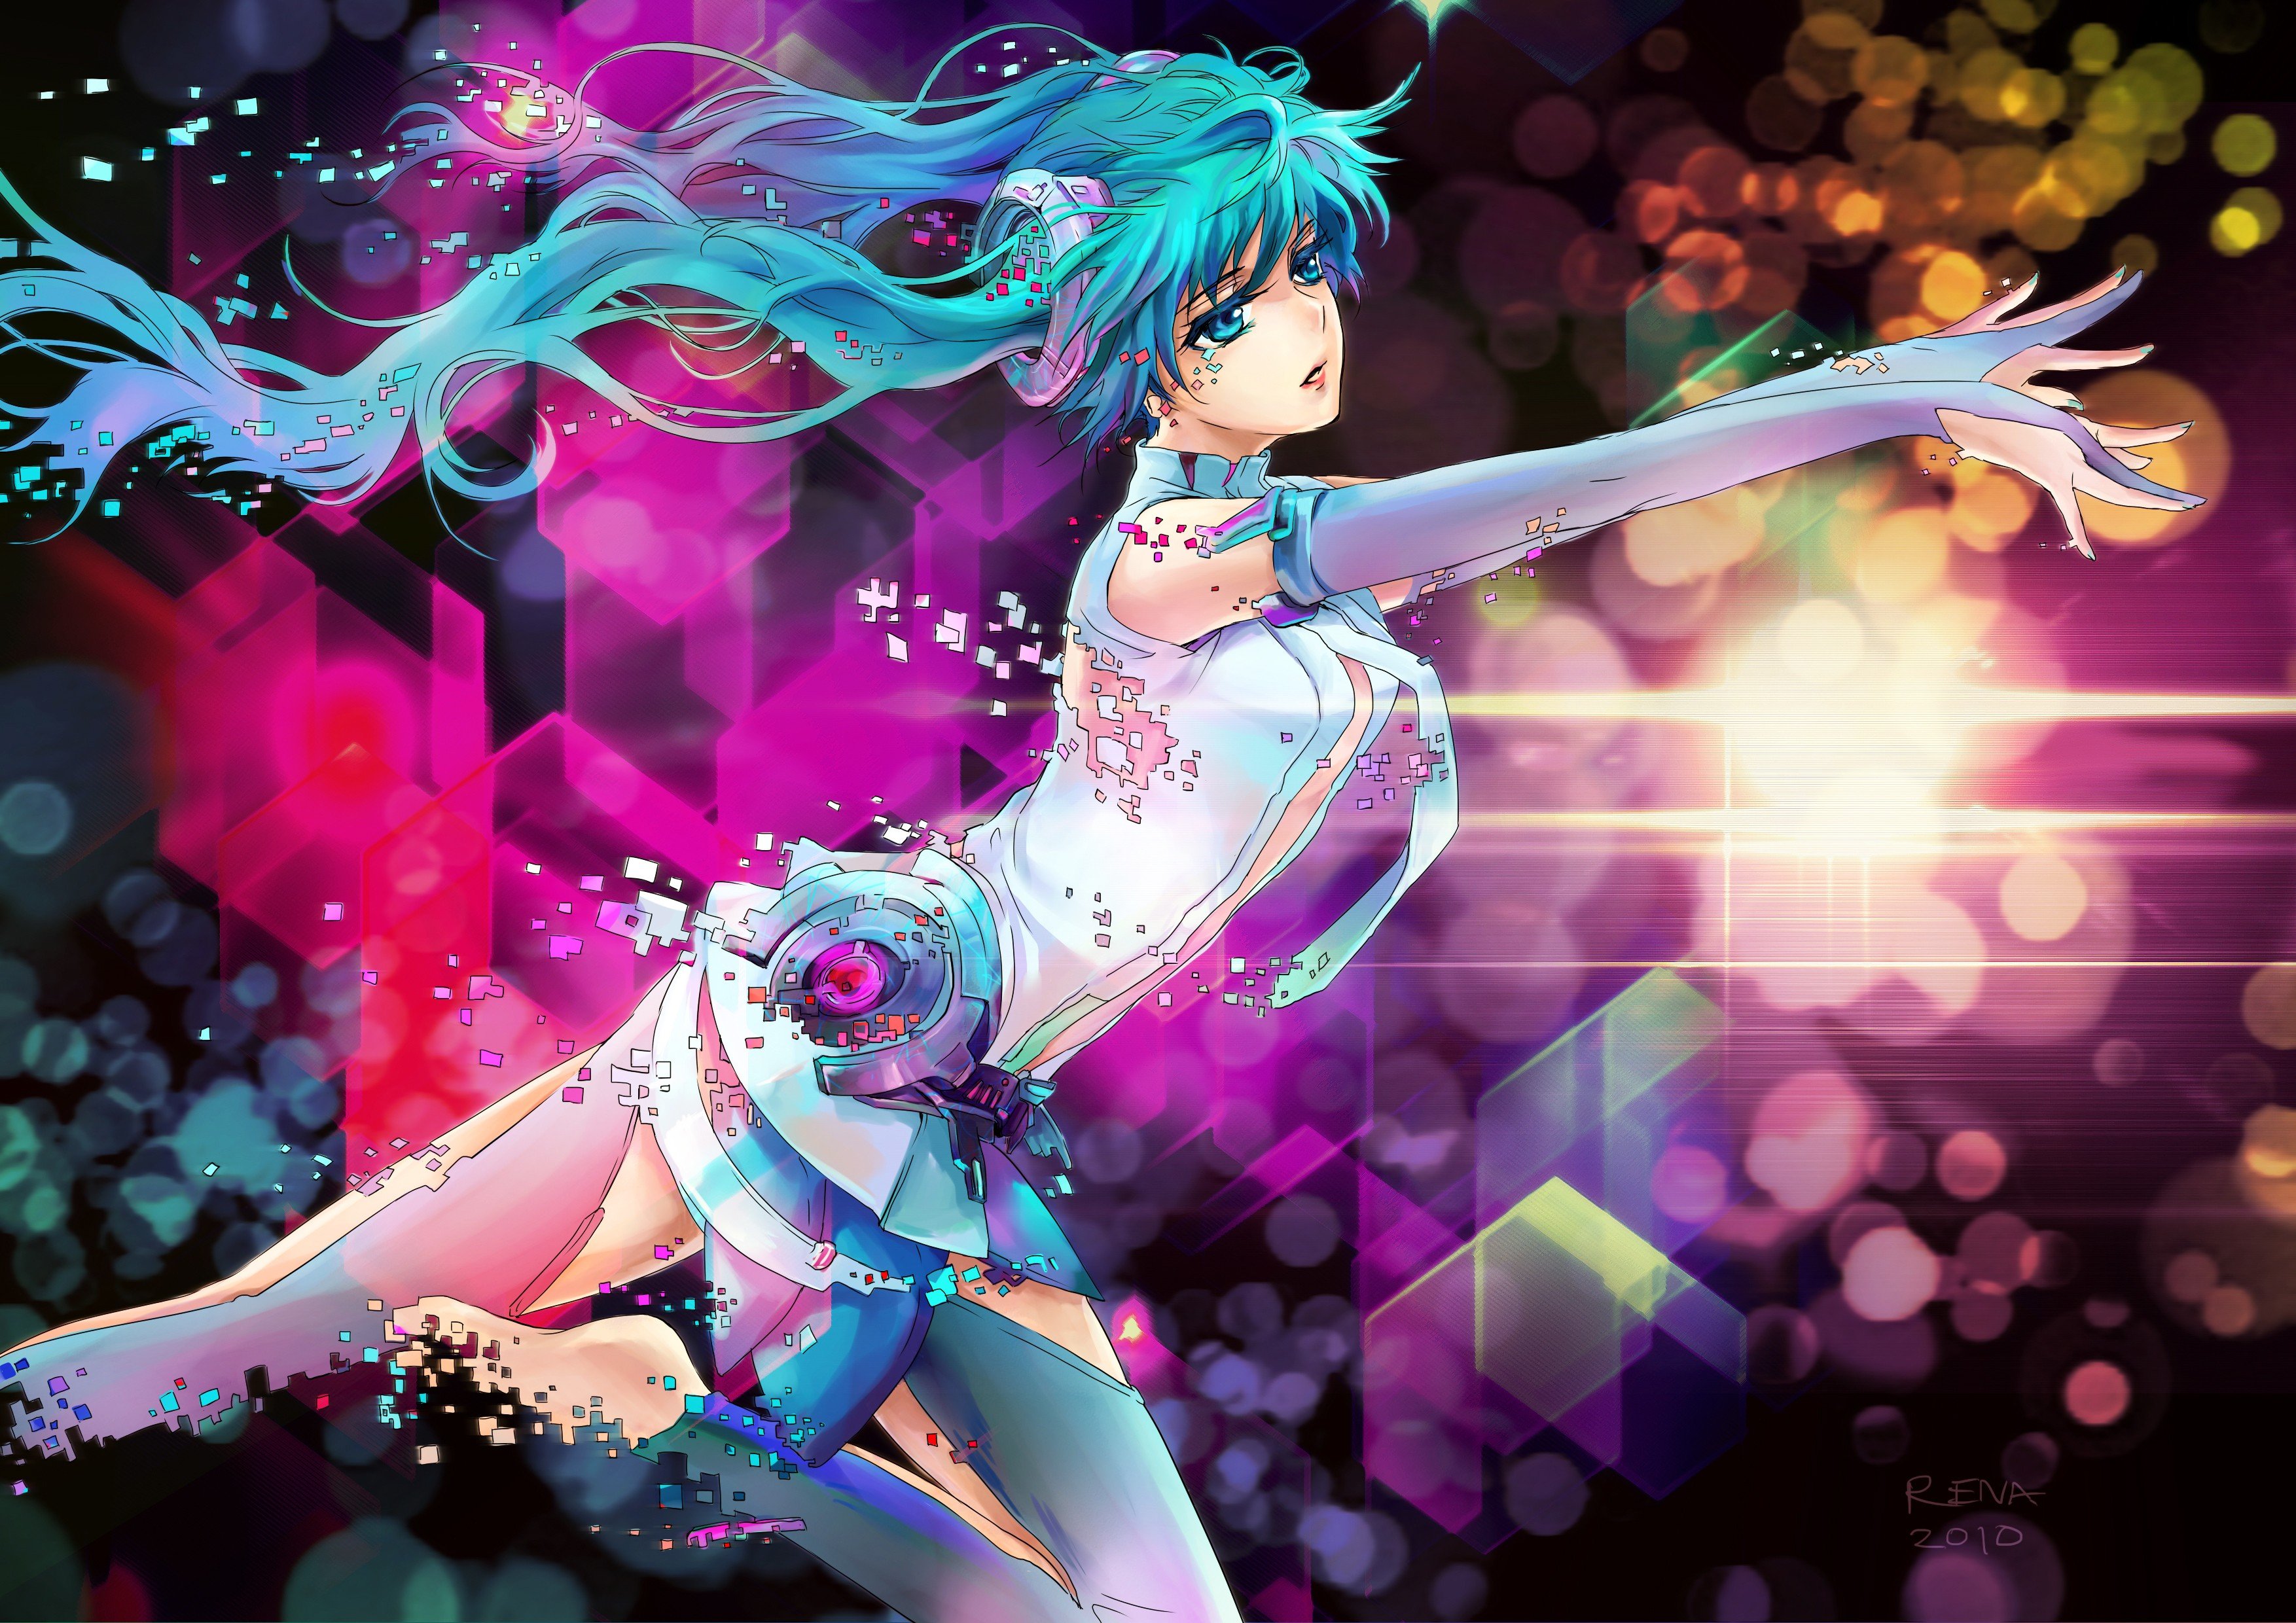 abstract, Vocaloid, Gloves, Dress, Multicolor, Hatsune, Miku, Blue, Eyes, Tie, Long, Hair, Blue, Hair, Thigh, Highs, Twintails, Miku, Append, Anime, Girls, Vocaloid, Append, Nail, Polish Wallpaper